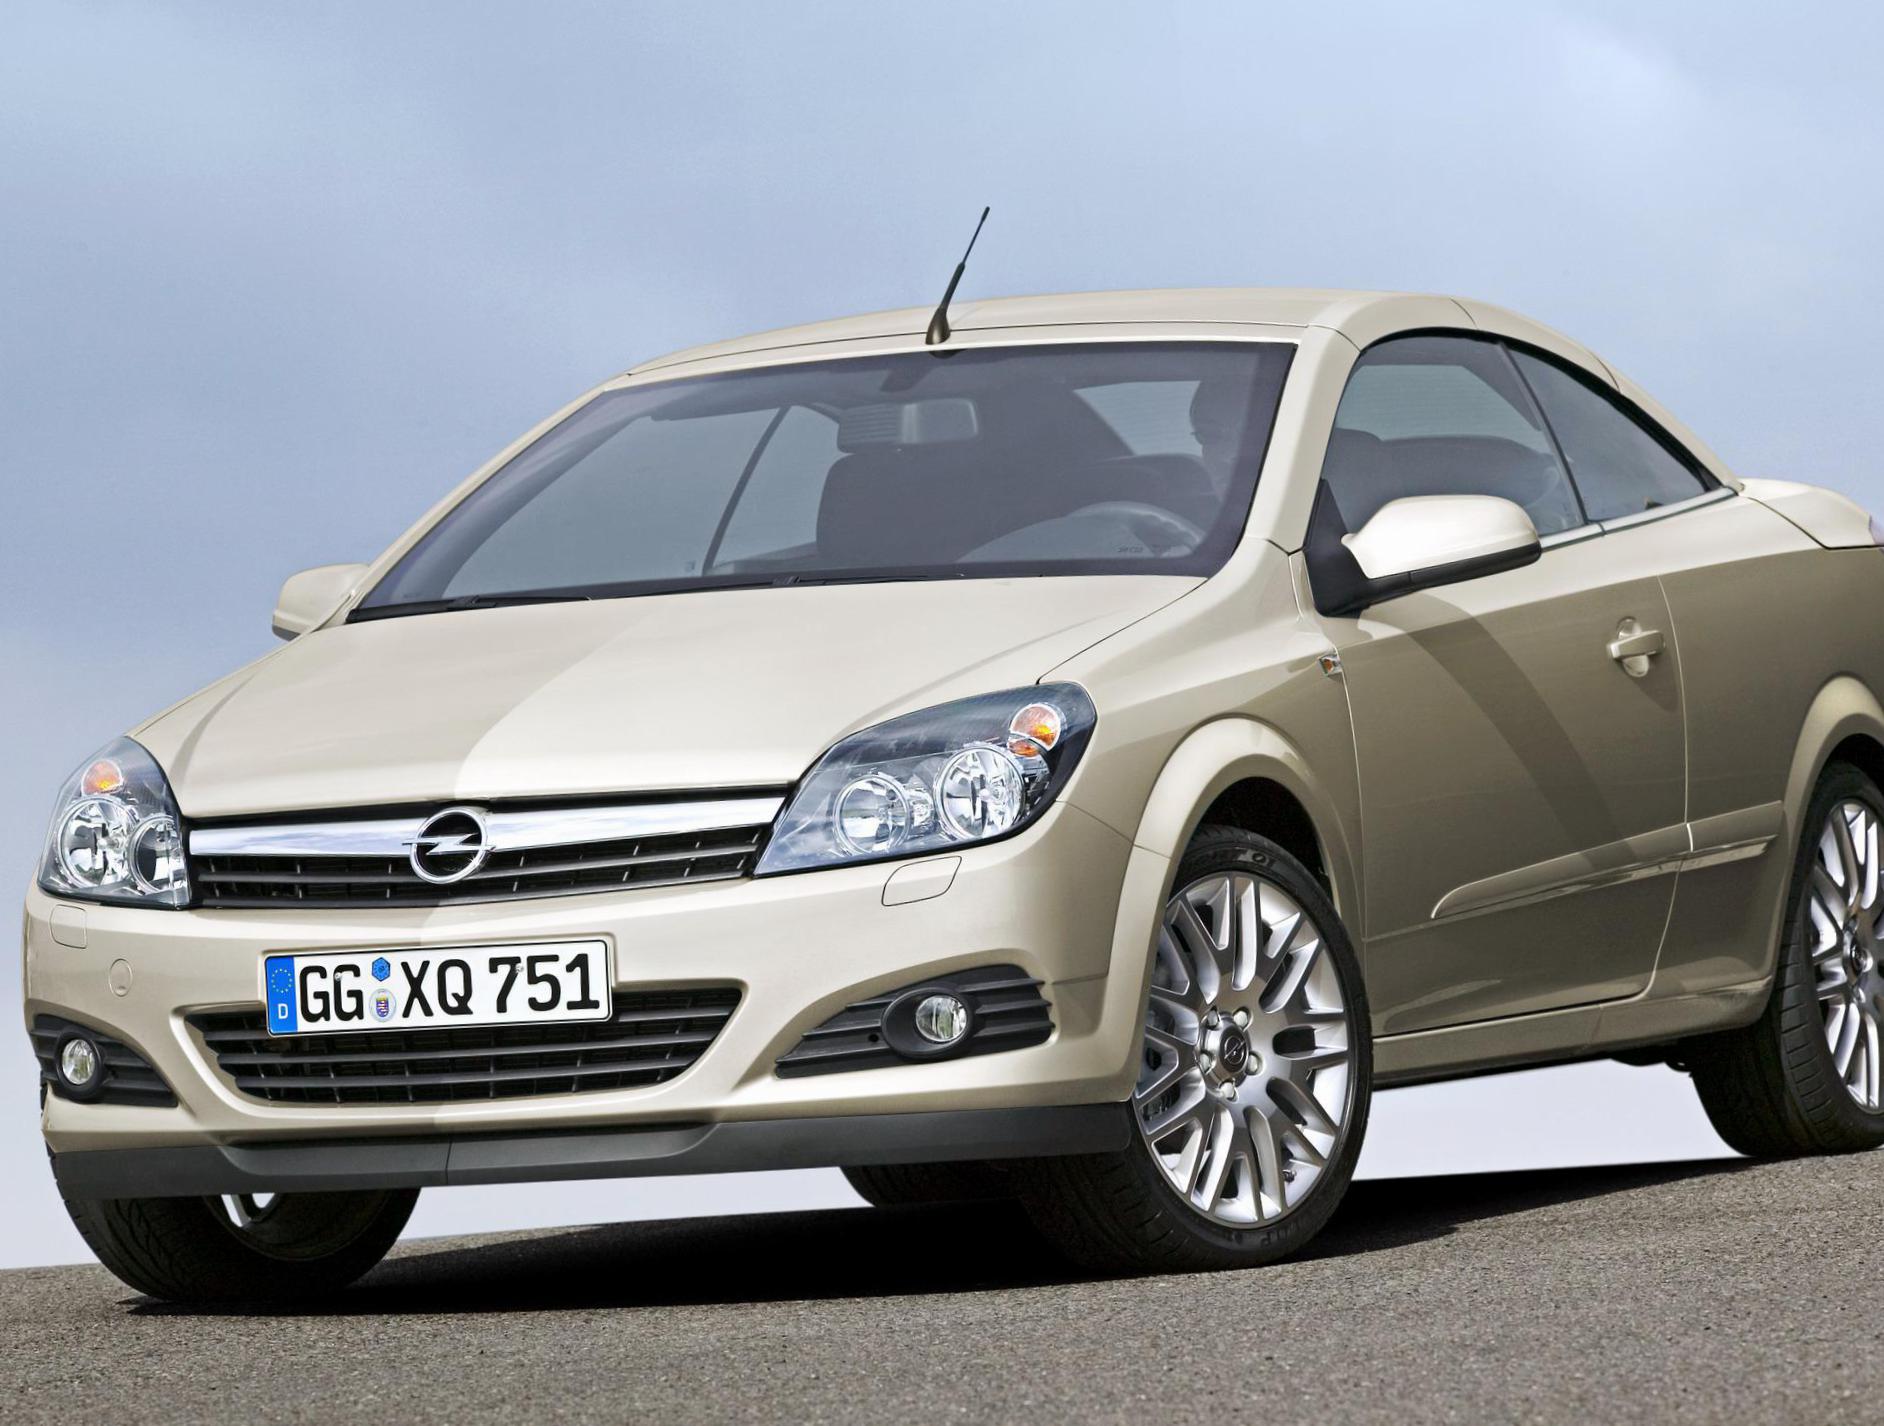 Opel Astra H TwinTop tuning hatchback